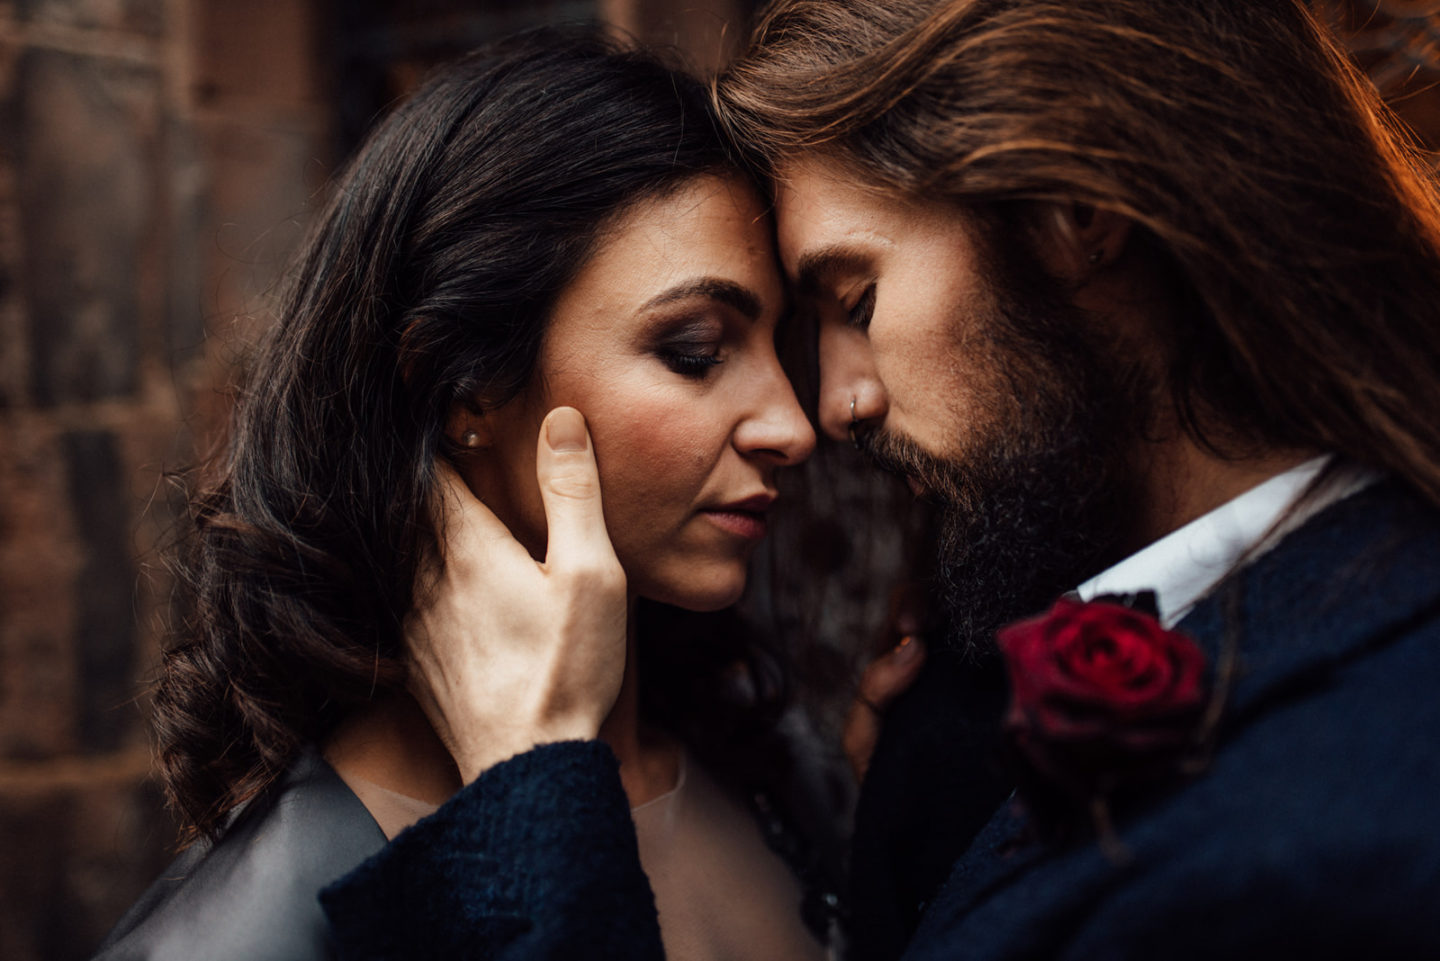 Beauty and The Beast Inspired City Wedding in Manchester